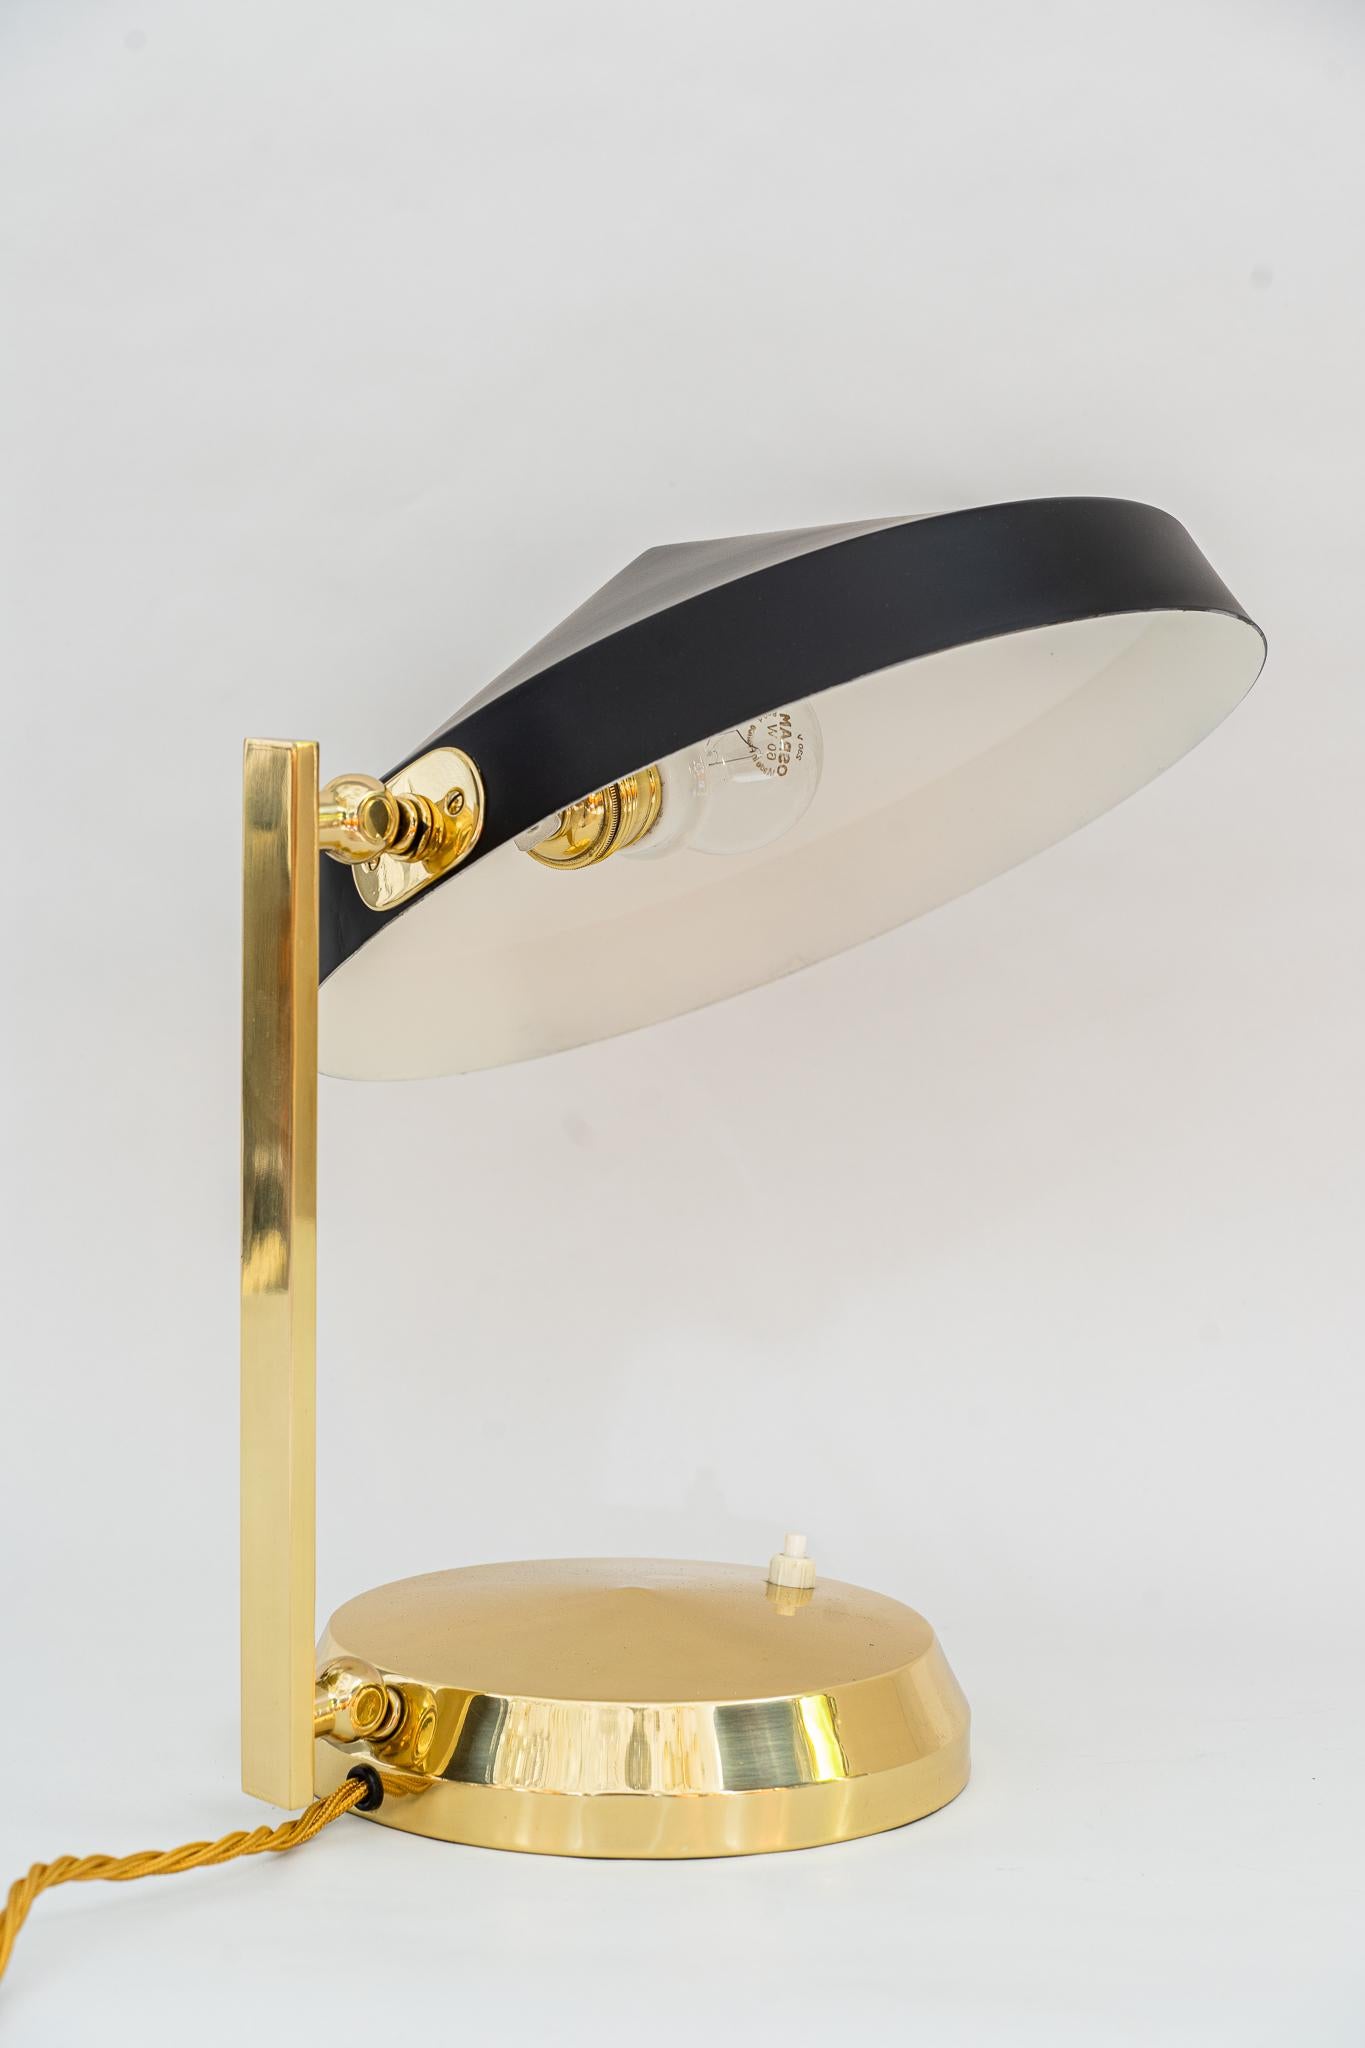 Table lamp vienna around 1960s
Brass polished and stove enameled
Shade is aluminium ( black lacquered ).